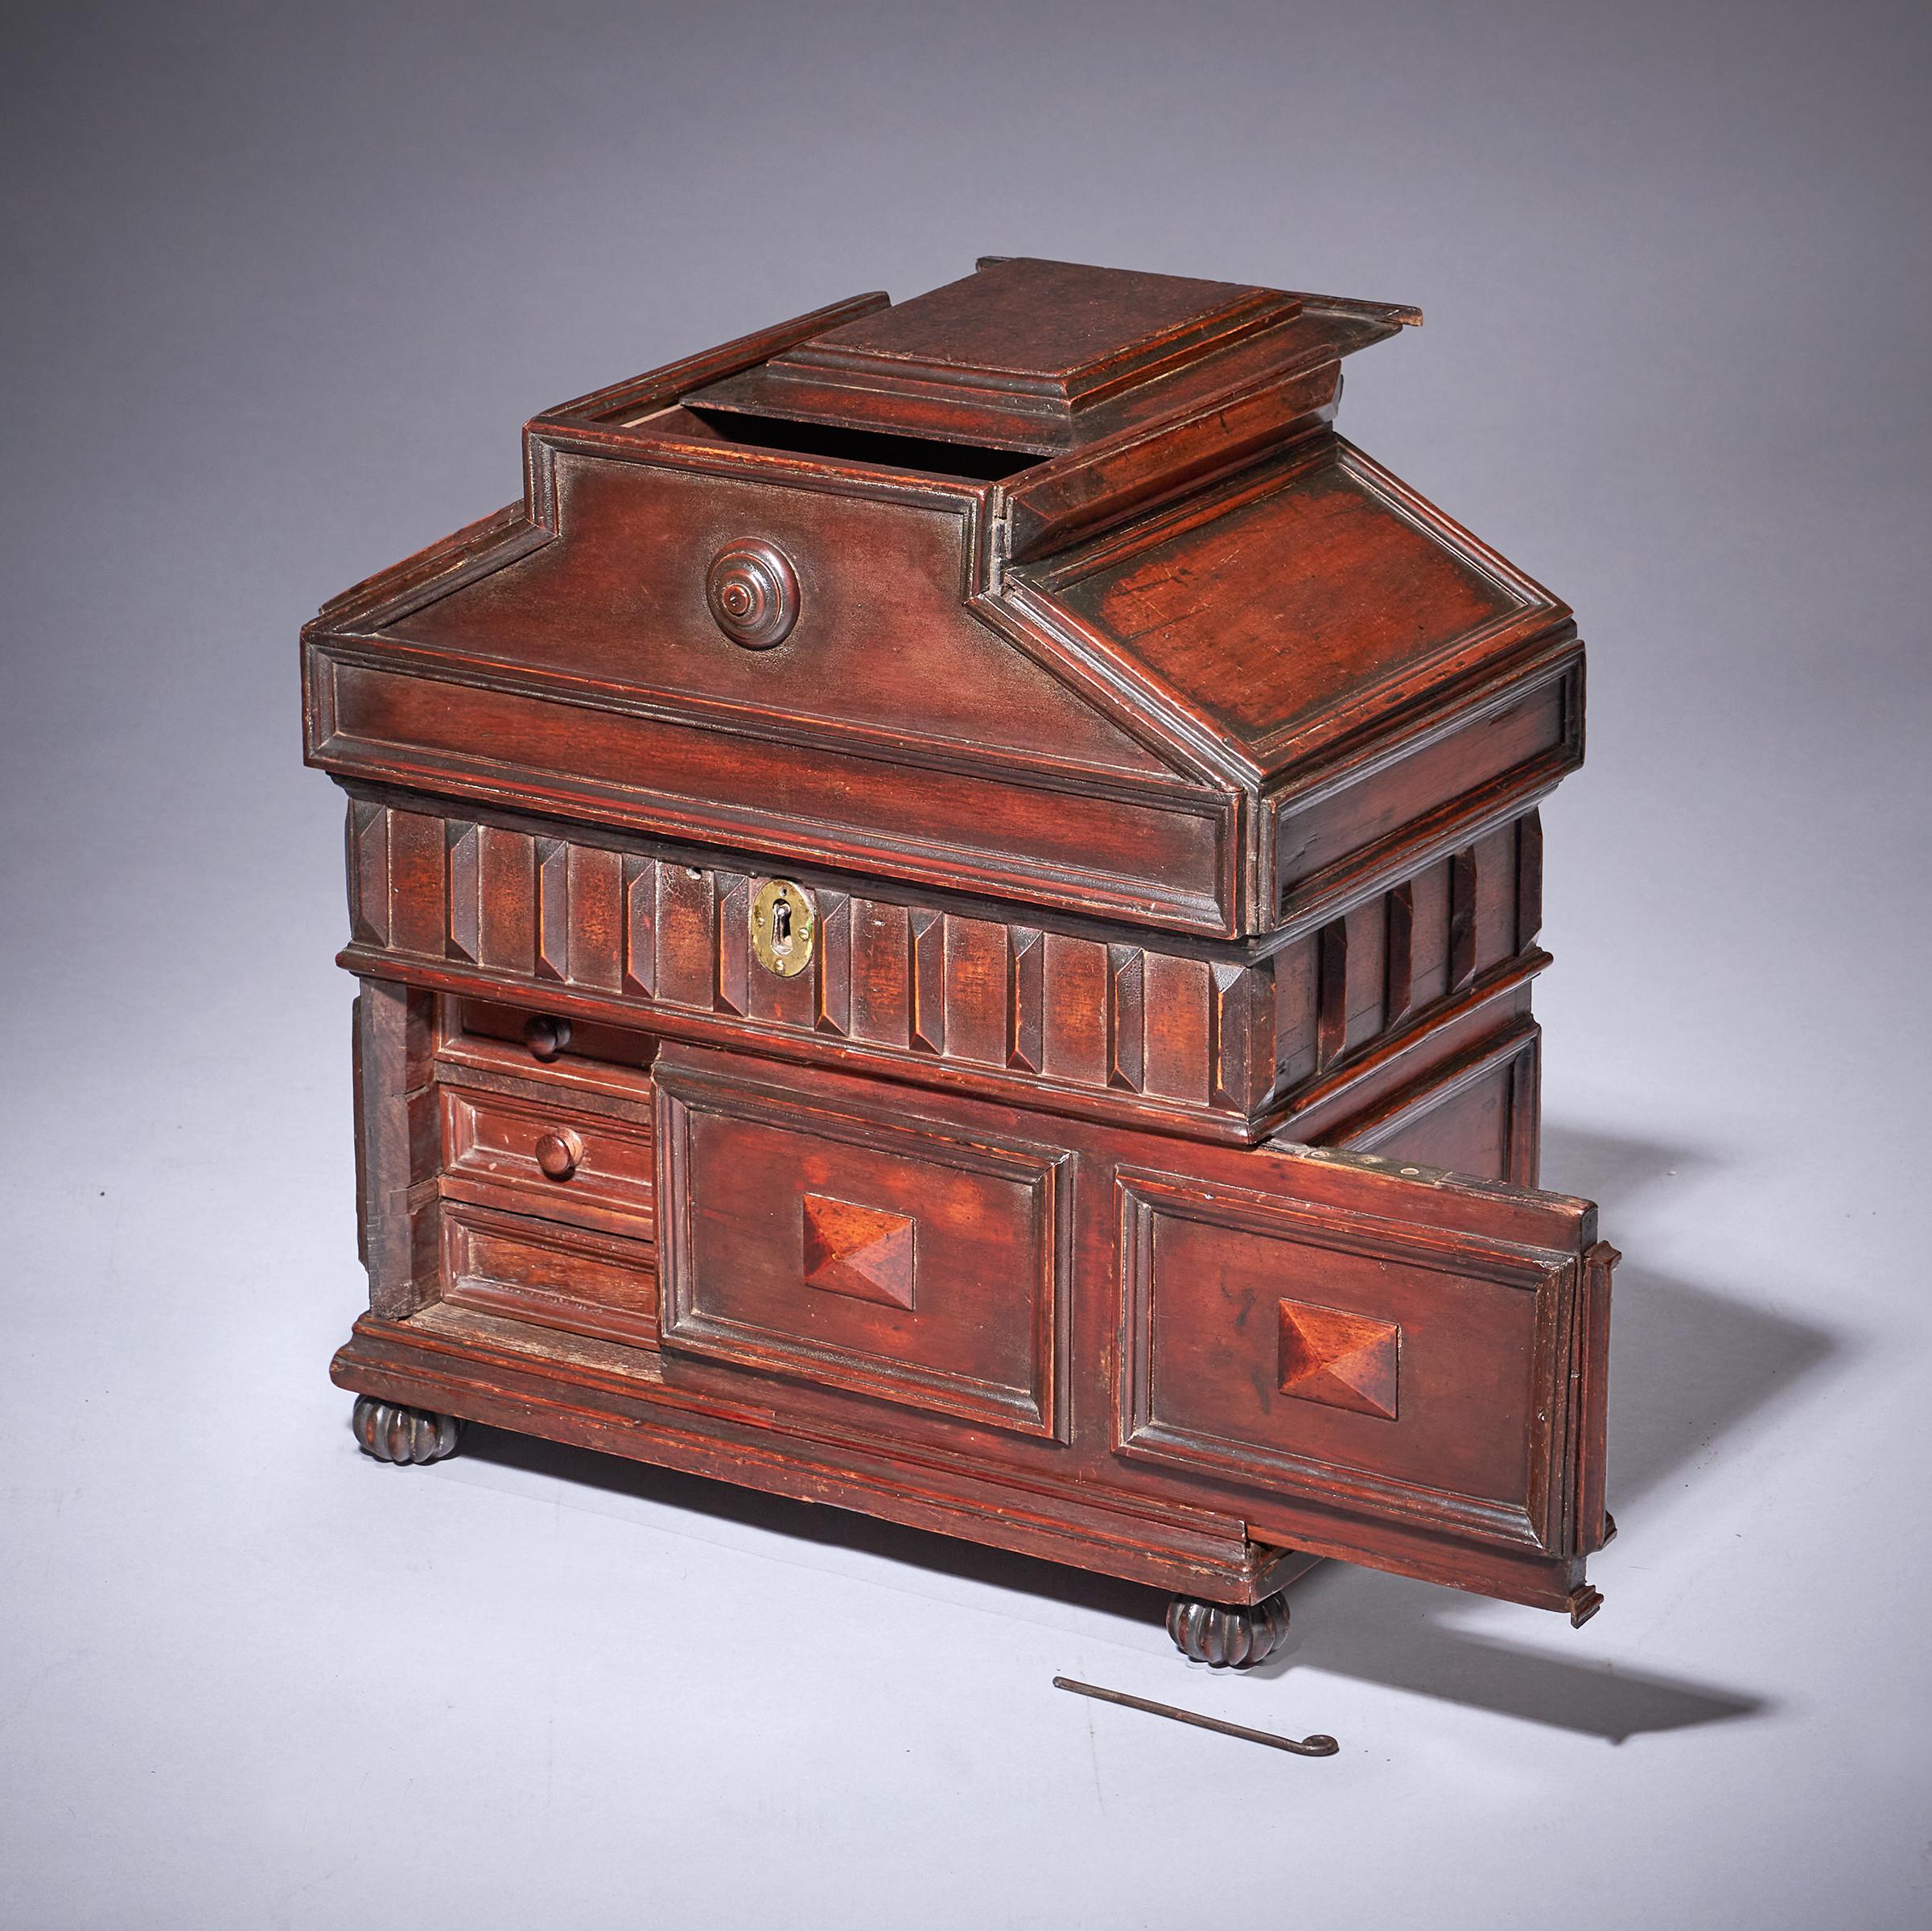 The late 16th century Elizabeth I Diminutive Cedar wood table casket or desk box, Circa 1600. England. 

The raised and moulded top slides open to reveal a recessed well.
The entire moulded 'caddy' with applied edge-mouldings to all faces opens on